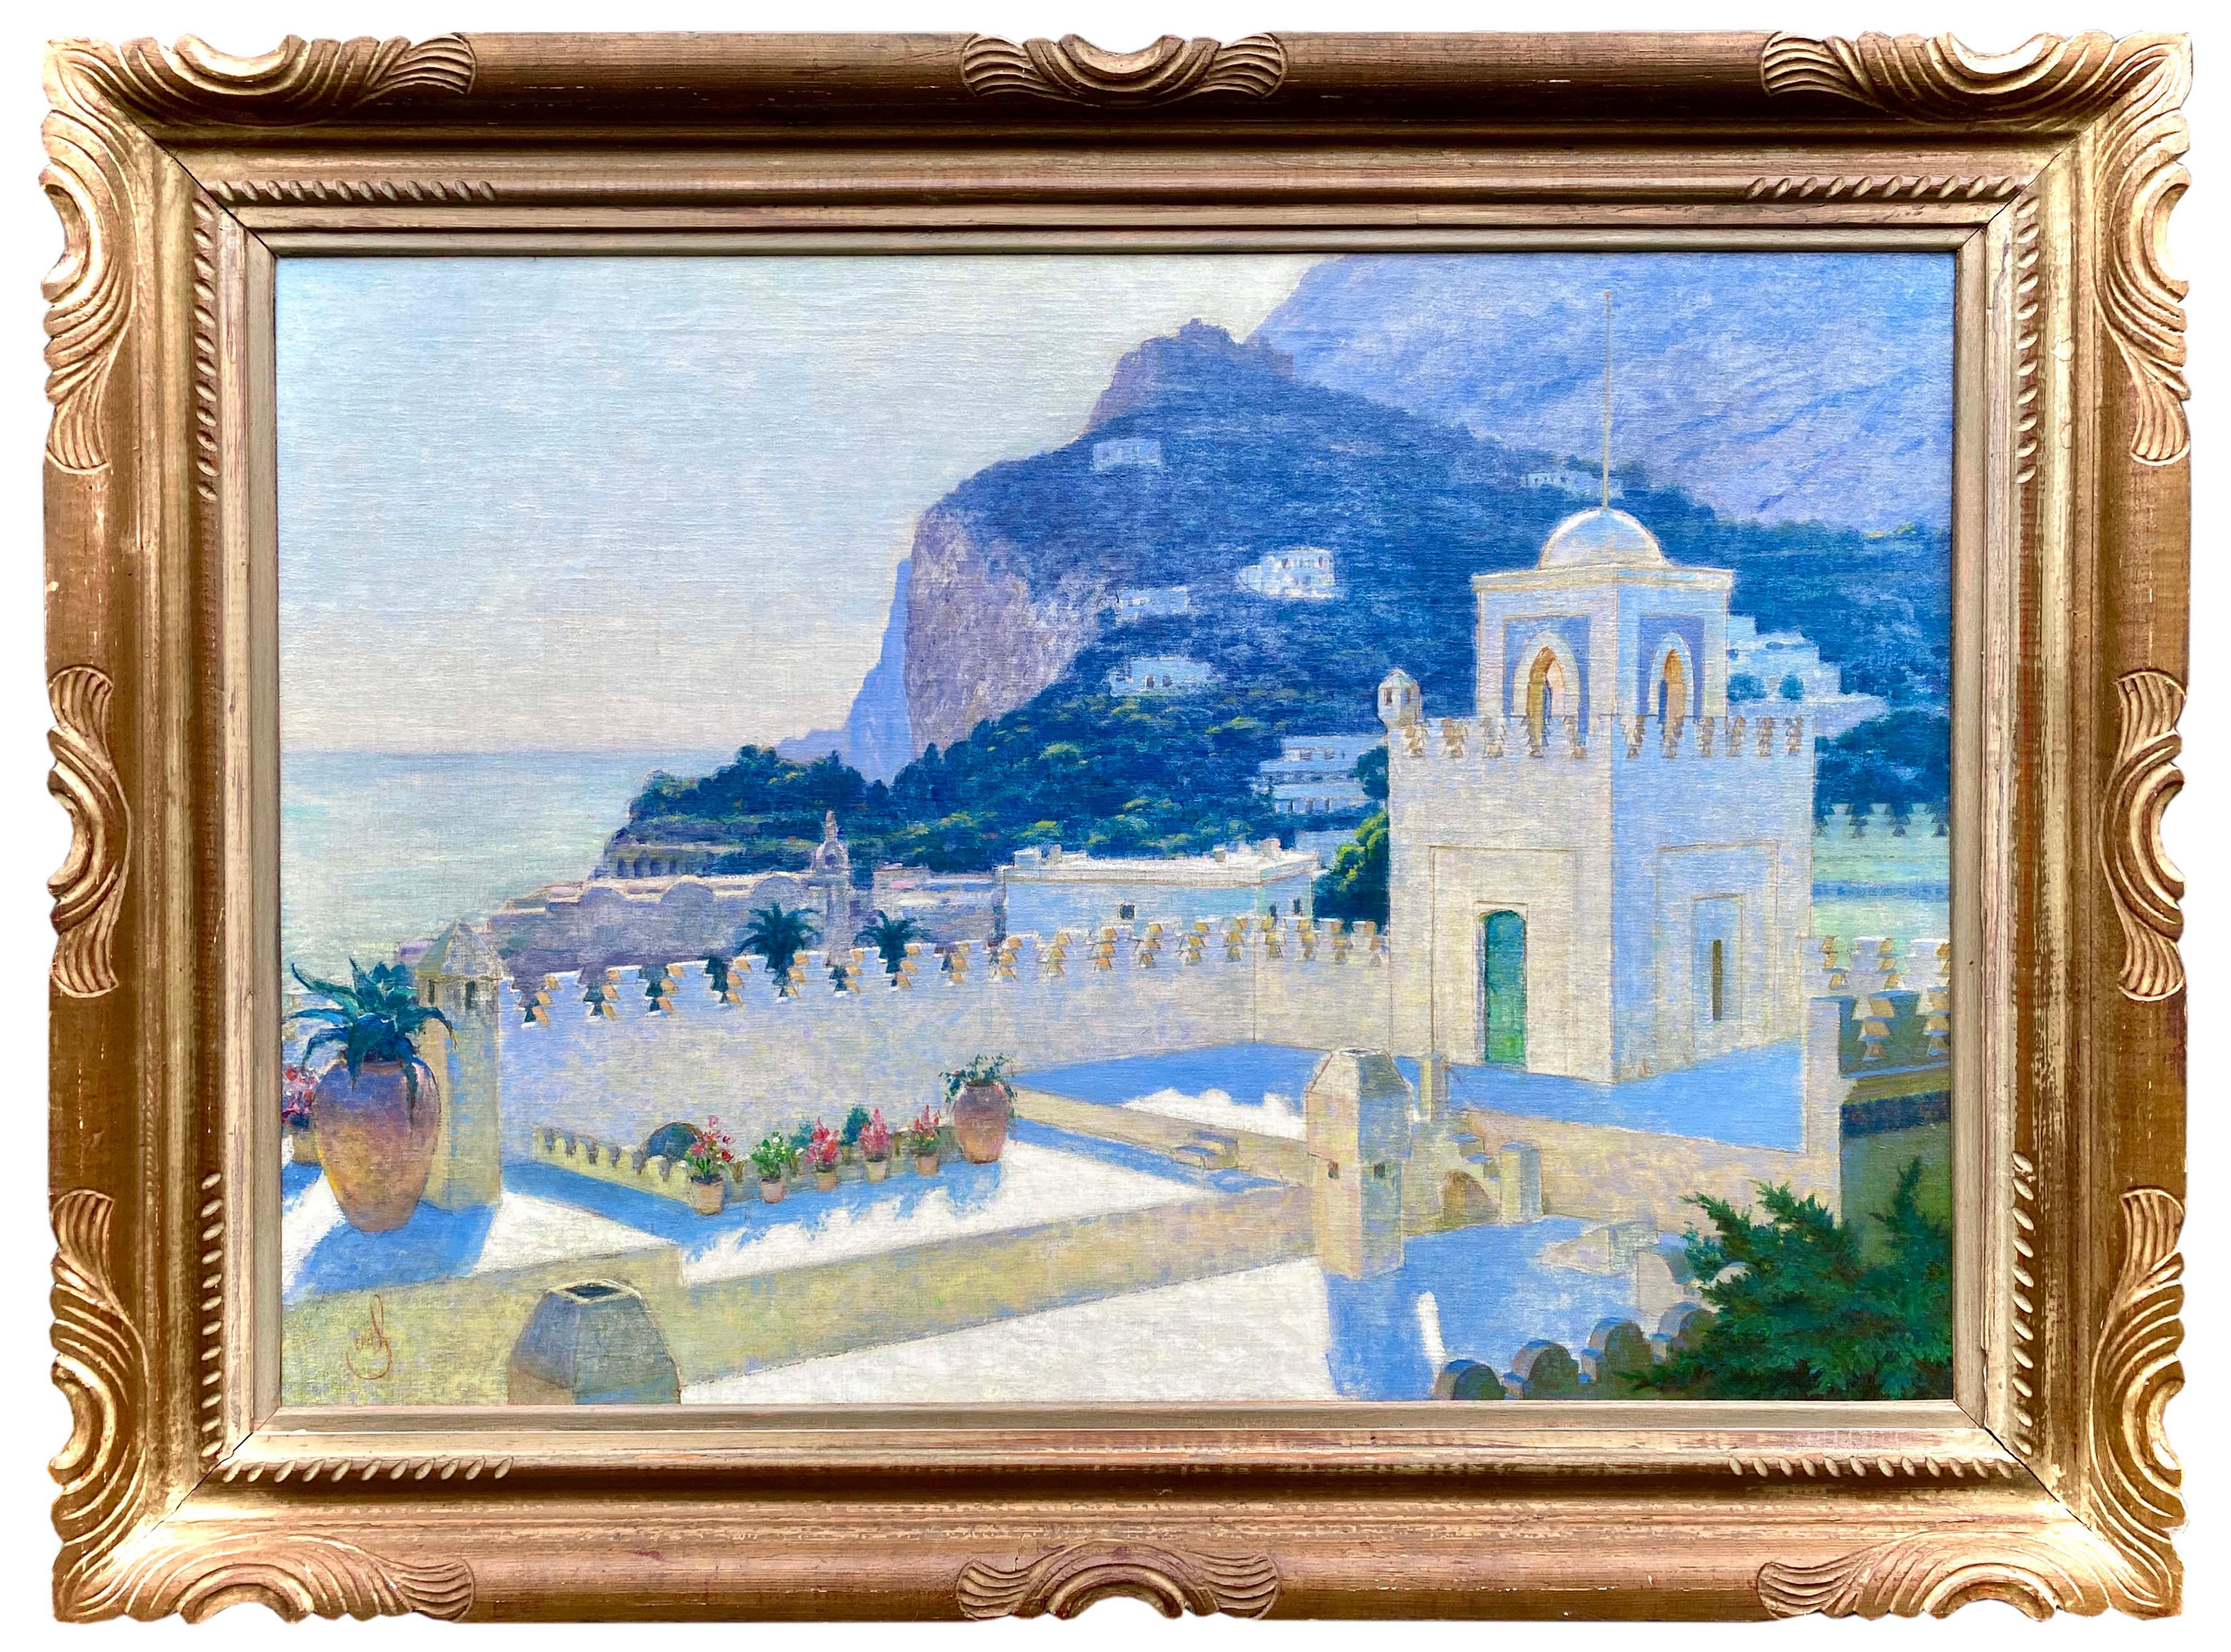 Unknown Landscape Painting - View of Villa Discopoli, Capri, Artist 19th - 20th Century, Signed by Monogram 